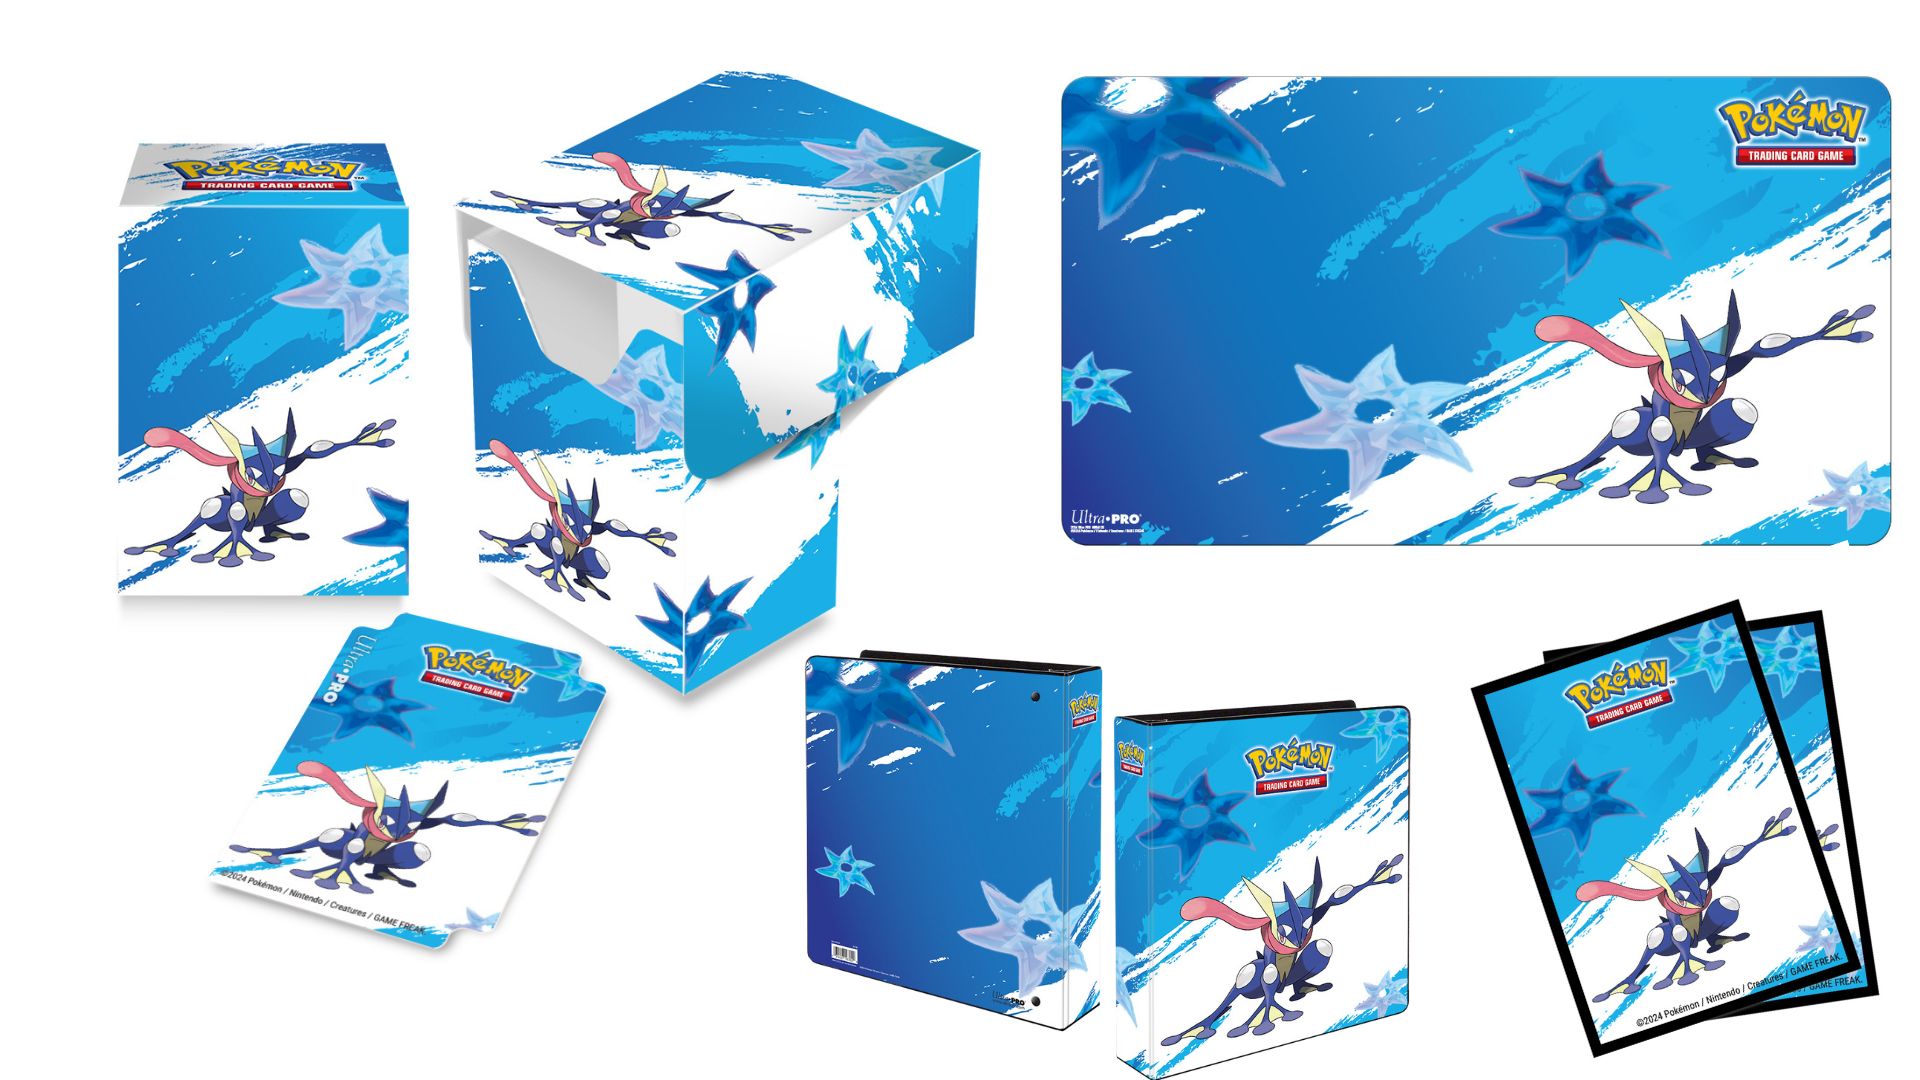 Greninja Ultra PRO New Items Binders Sleeves Deck Boxes Playmat Product Photos